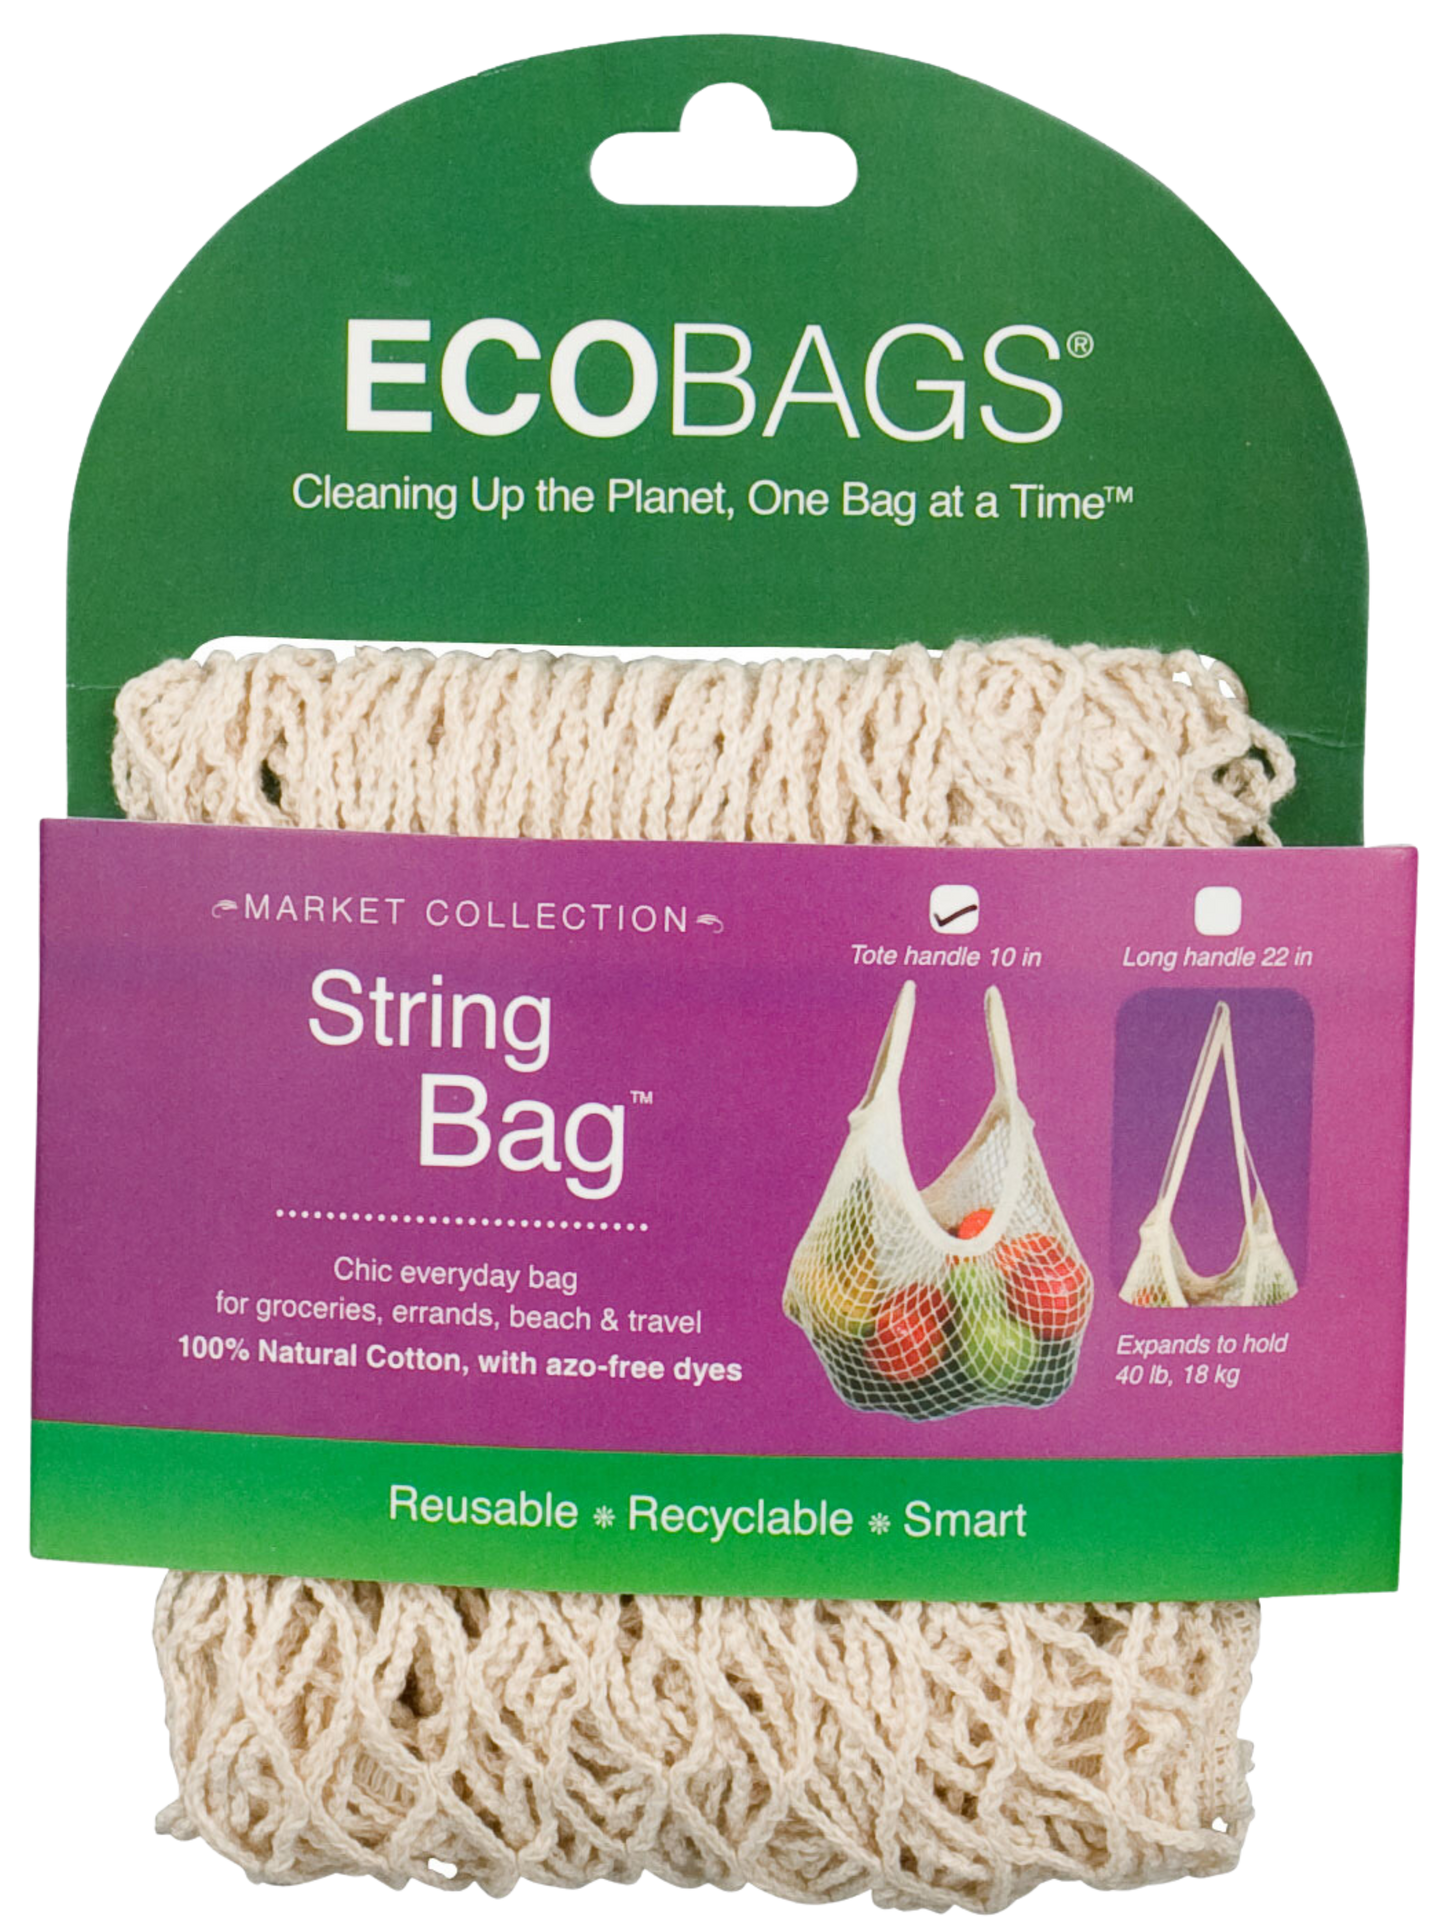 stock image of packaged string bag in natural